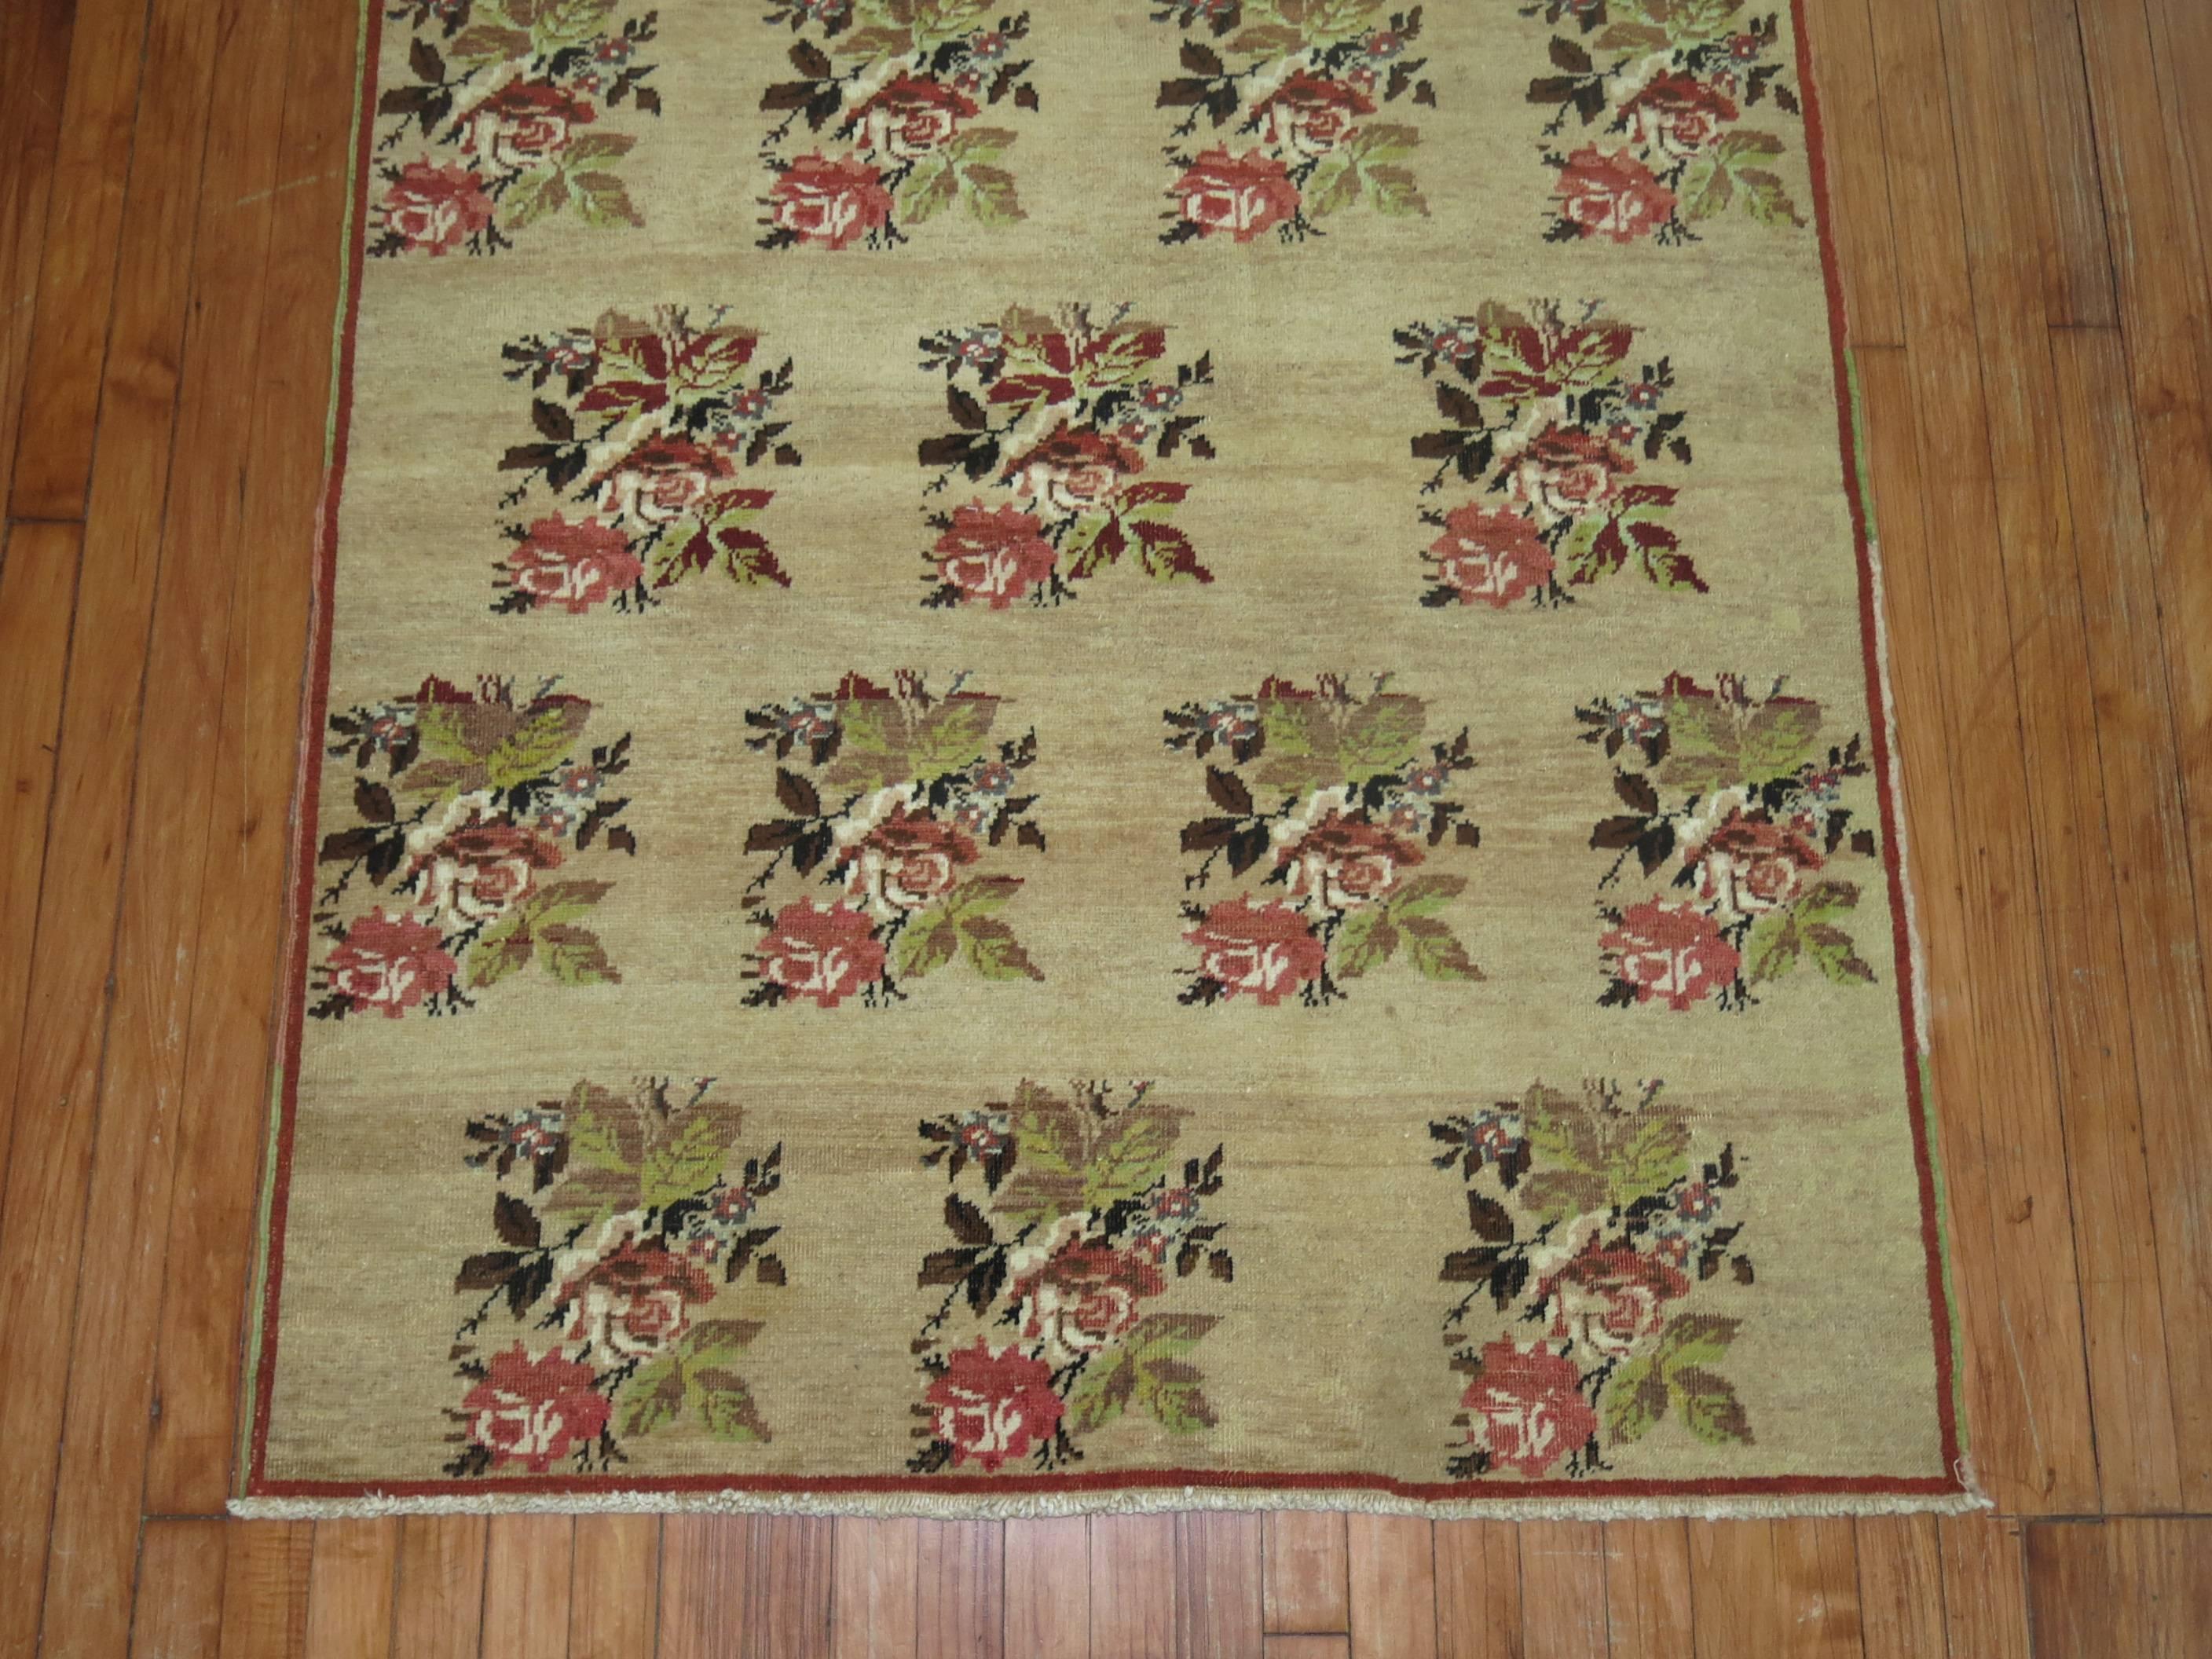 Vintage Turkish rug with an all-over floral design on a came colored ground.

3'10'' x 7'2''